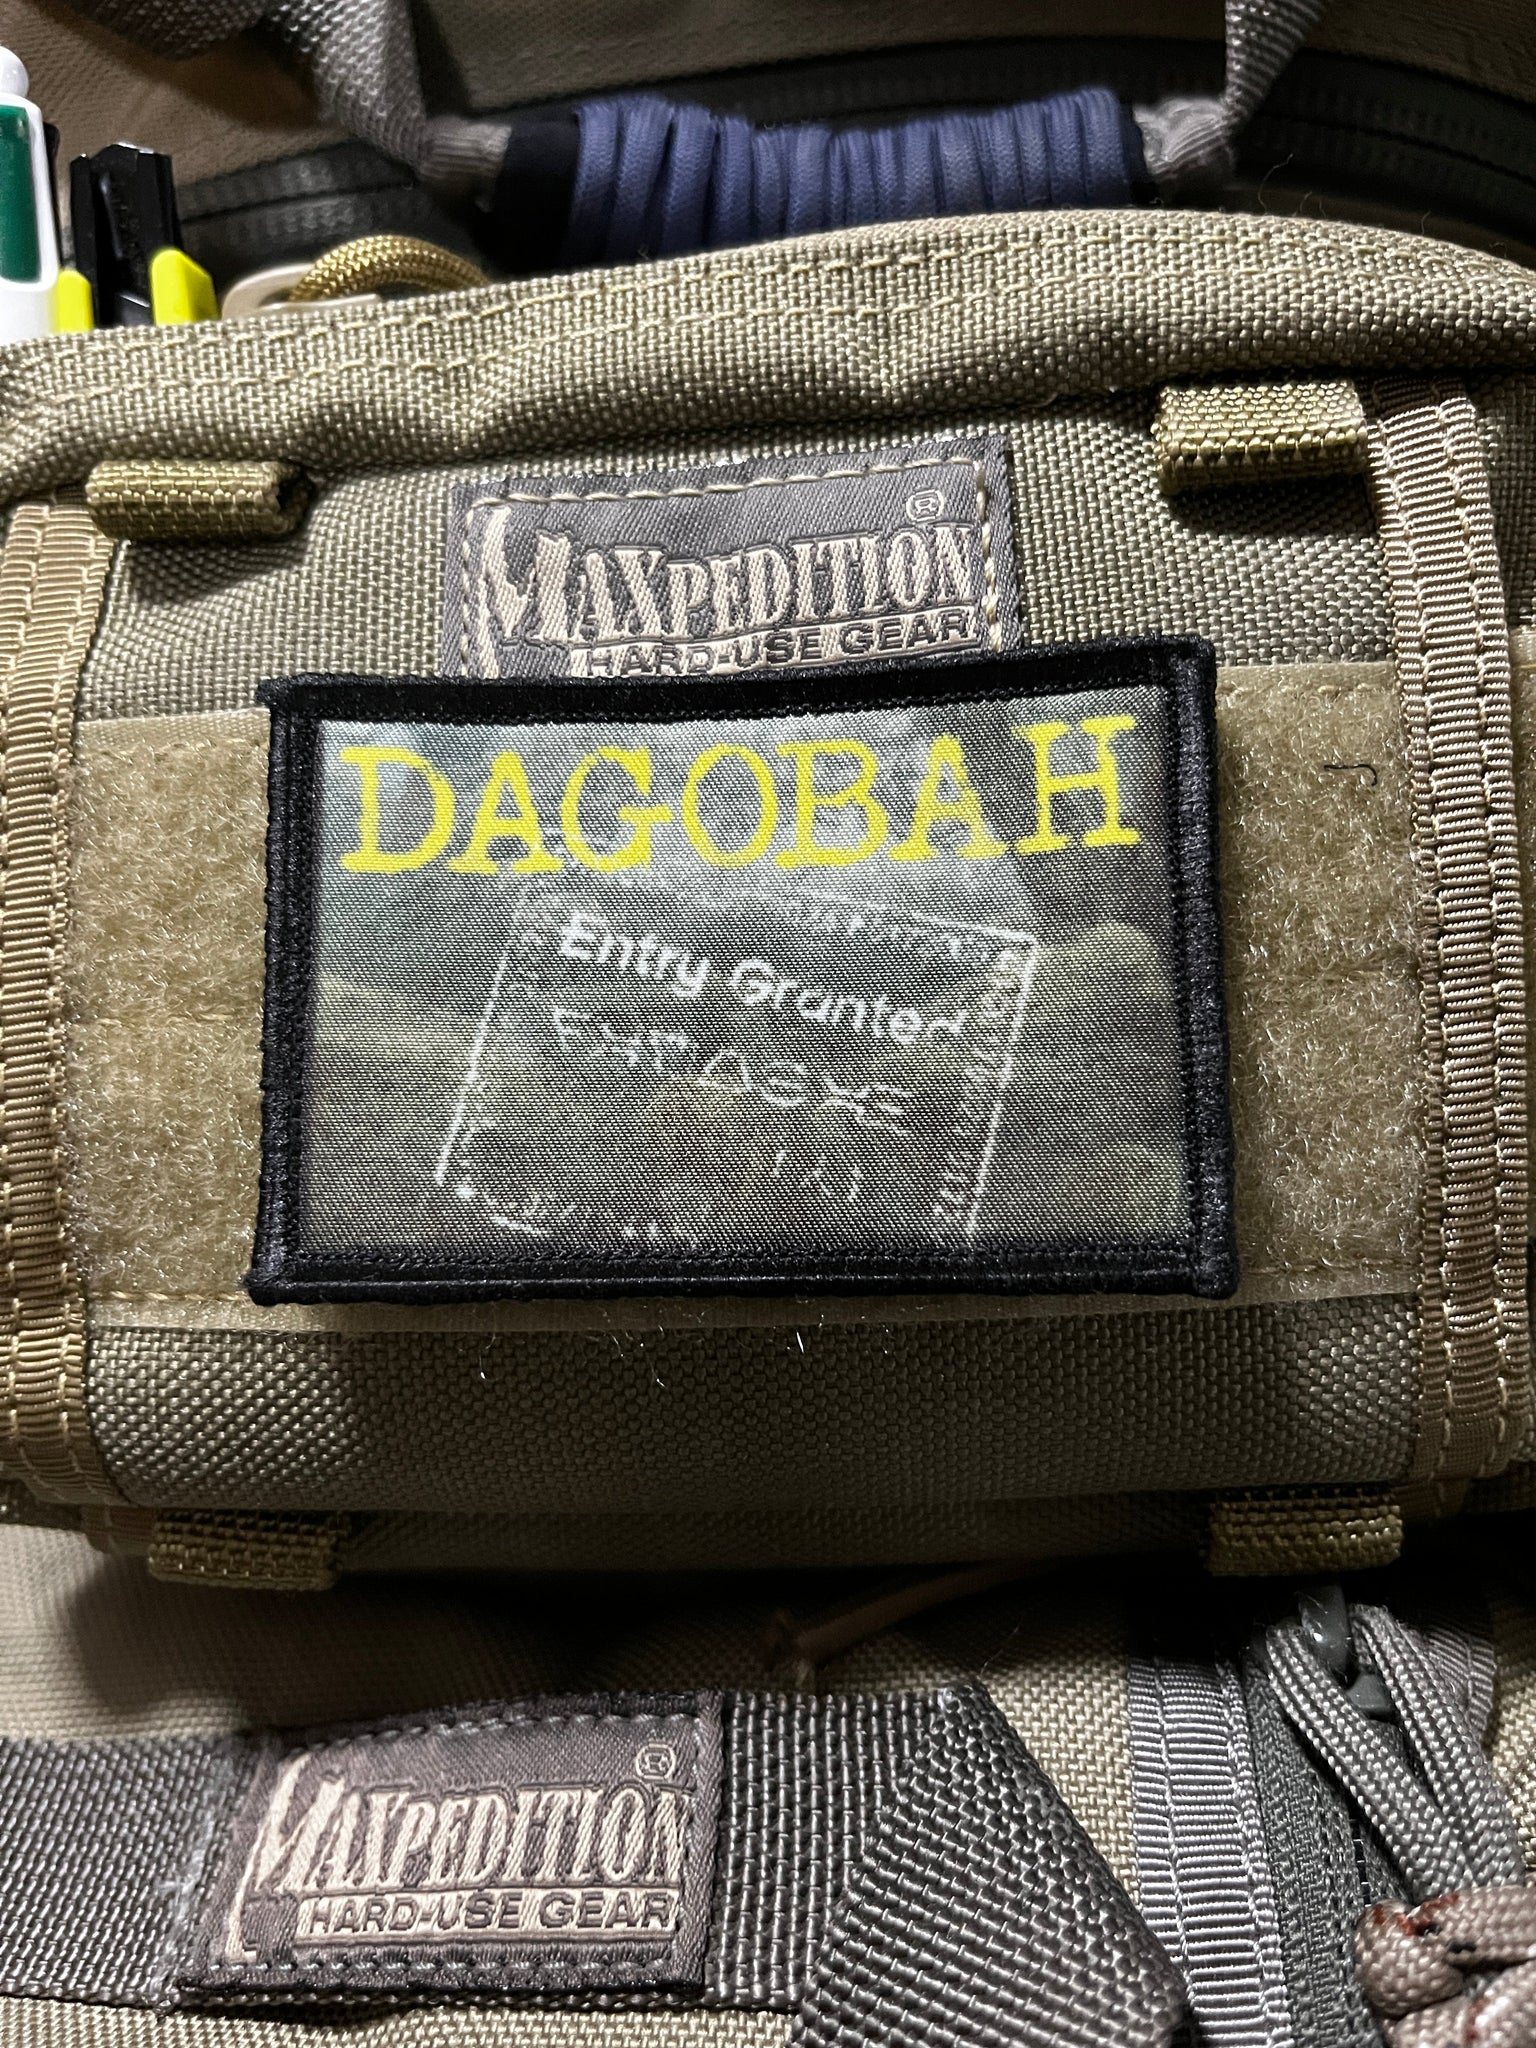 Star Wars Dagobah Passport Stamp Morale Patch Morale Patches Redheaded T Shirts 